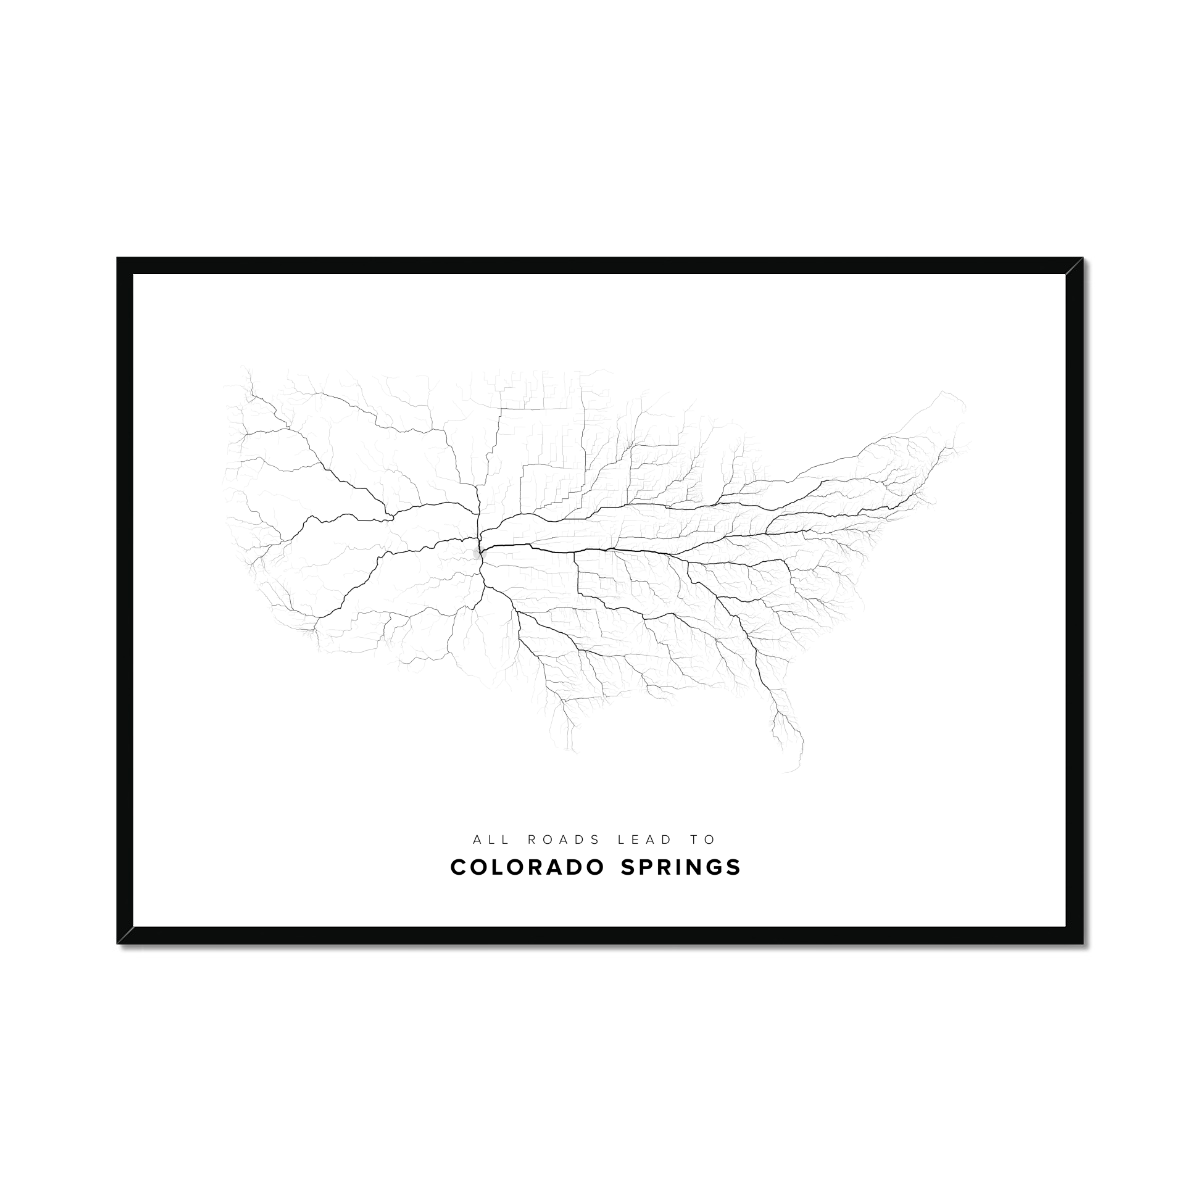 All roads lead to Colorado Springs (United States of America) Fine Art Map Print